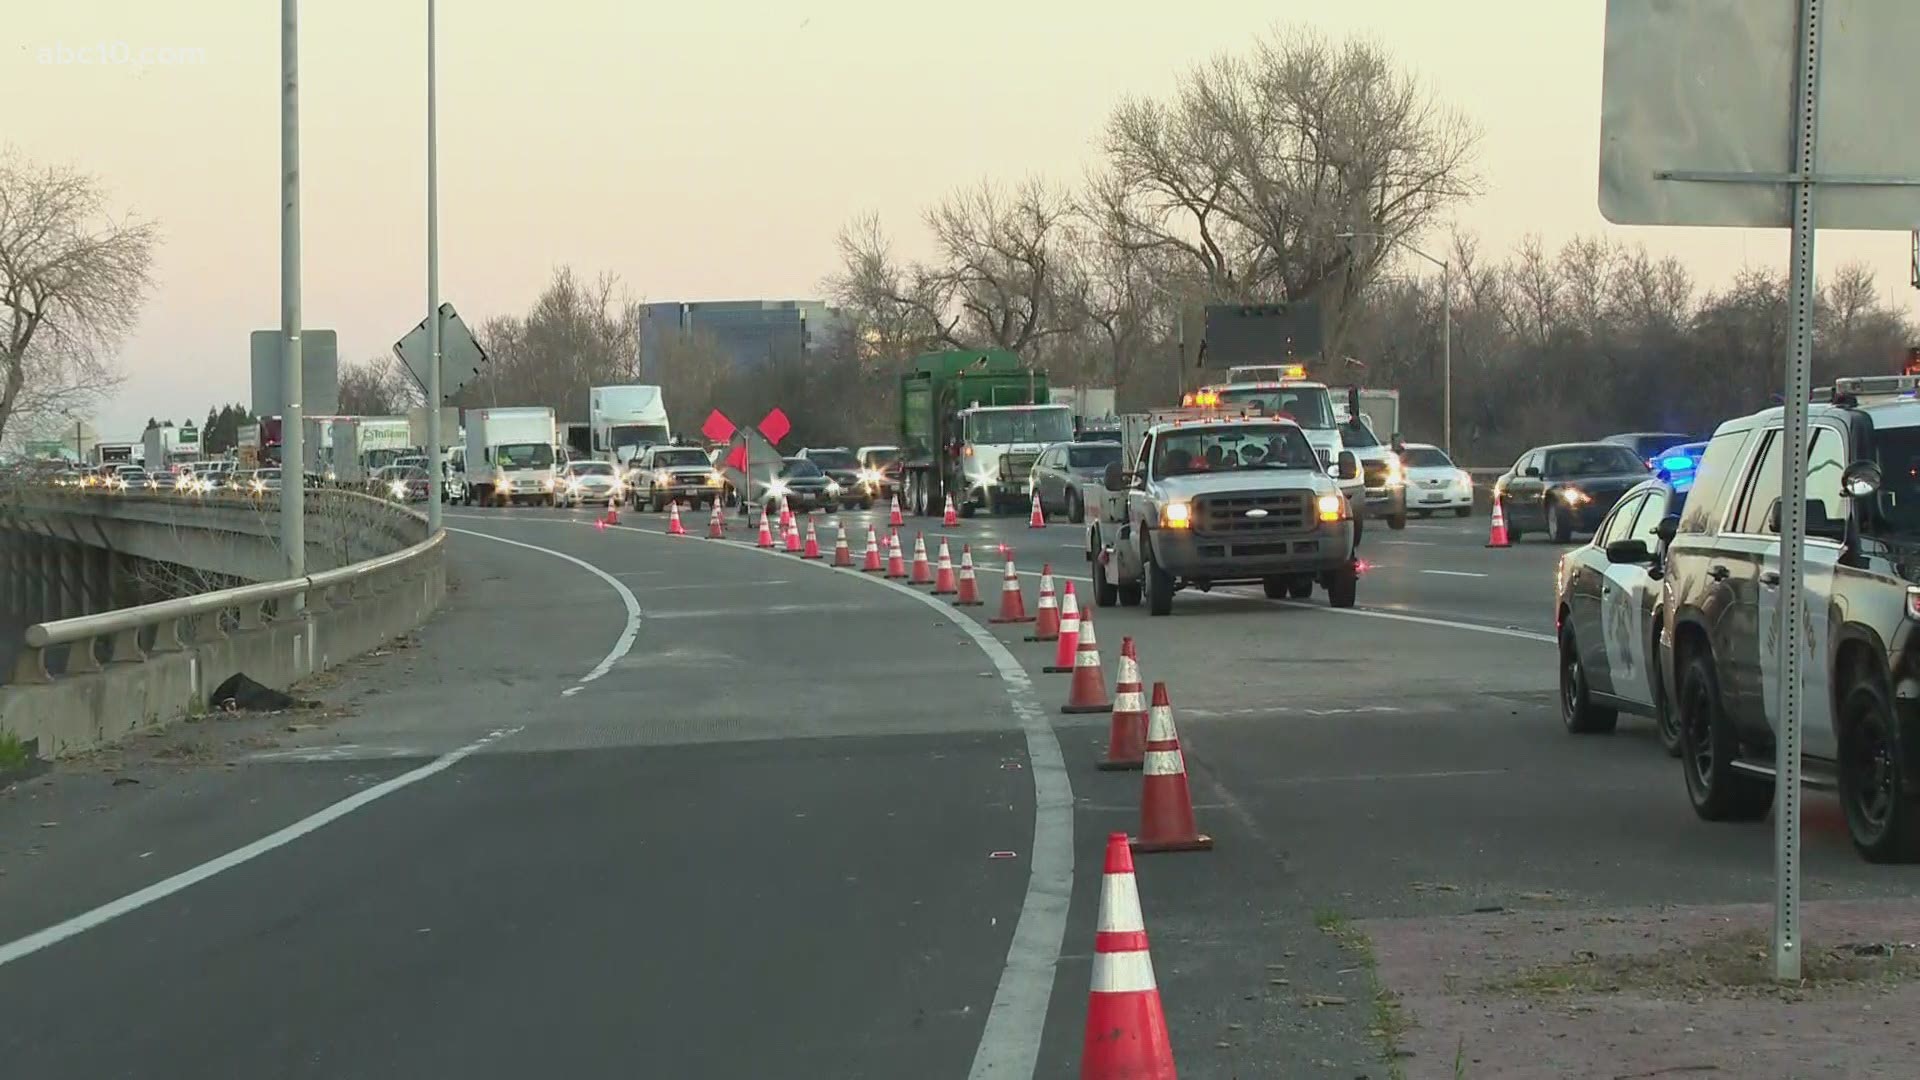 A person was killed on the freeway Wednesday morning causing some traffic, though the details are still being investigated.